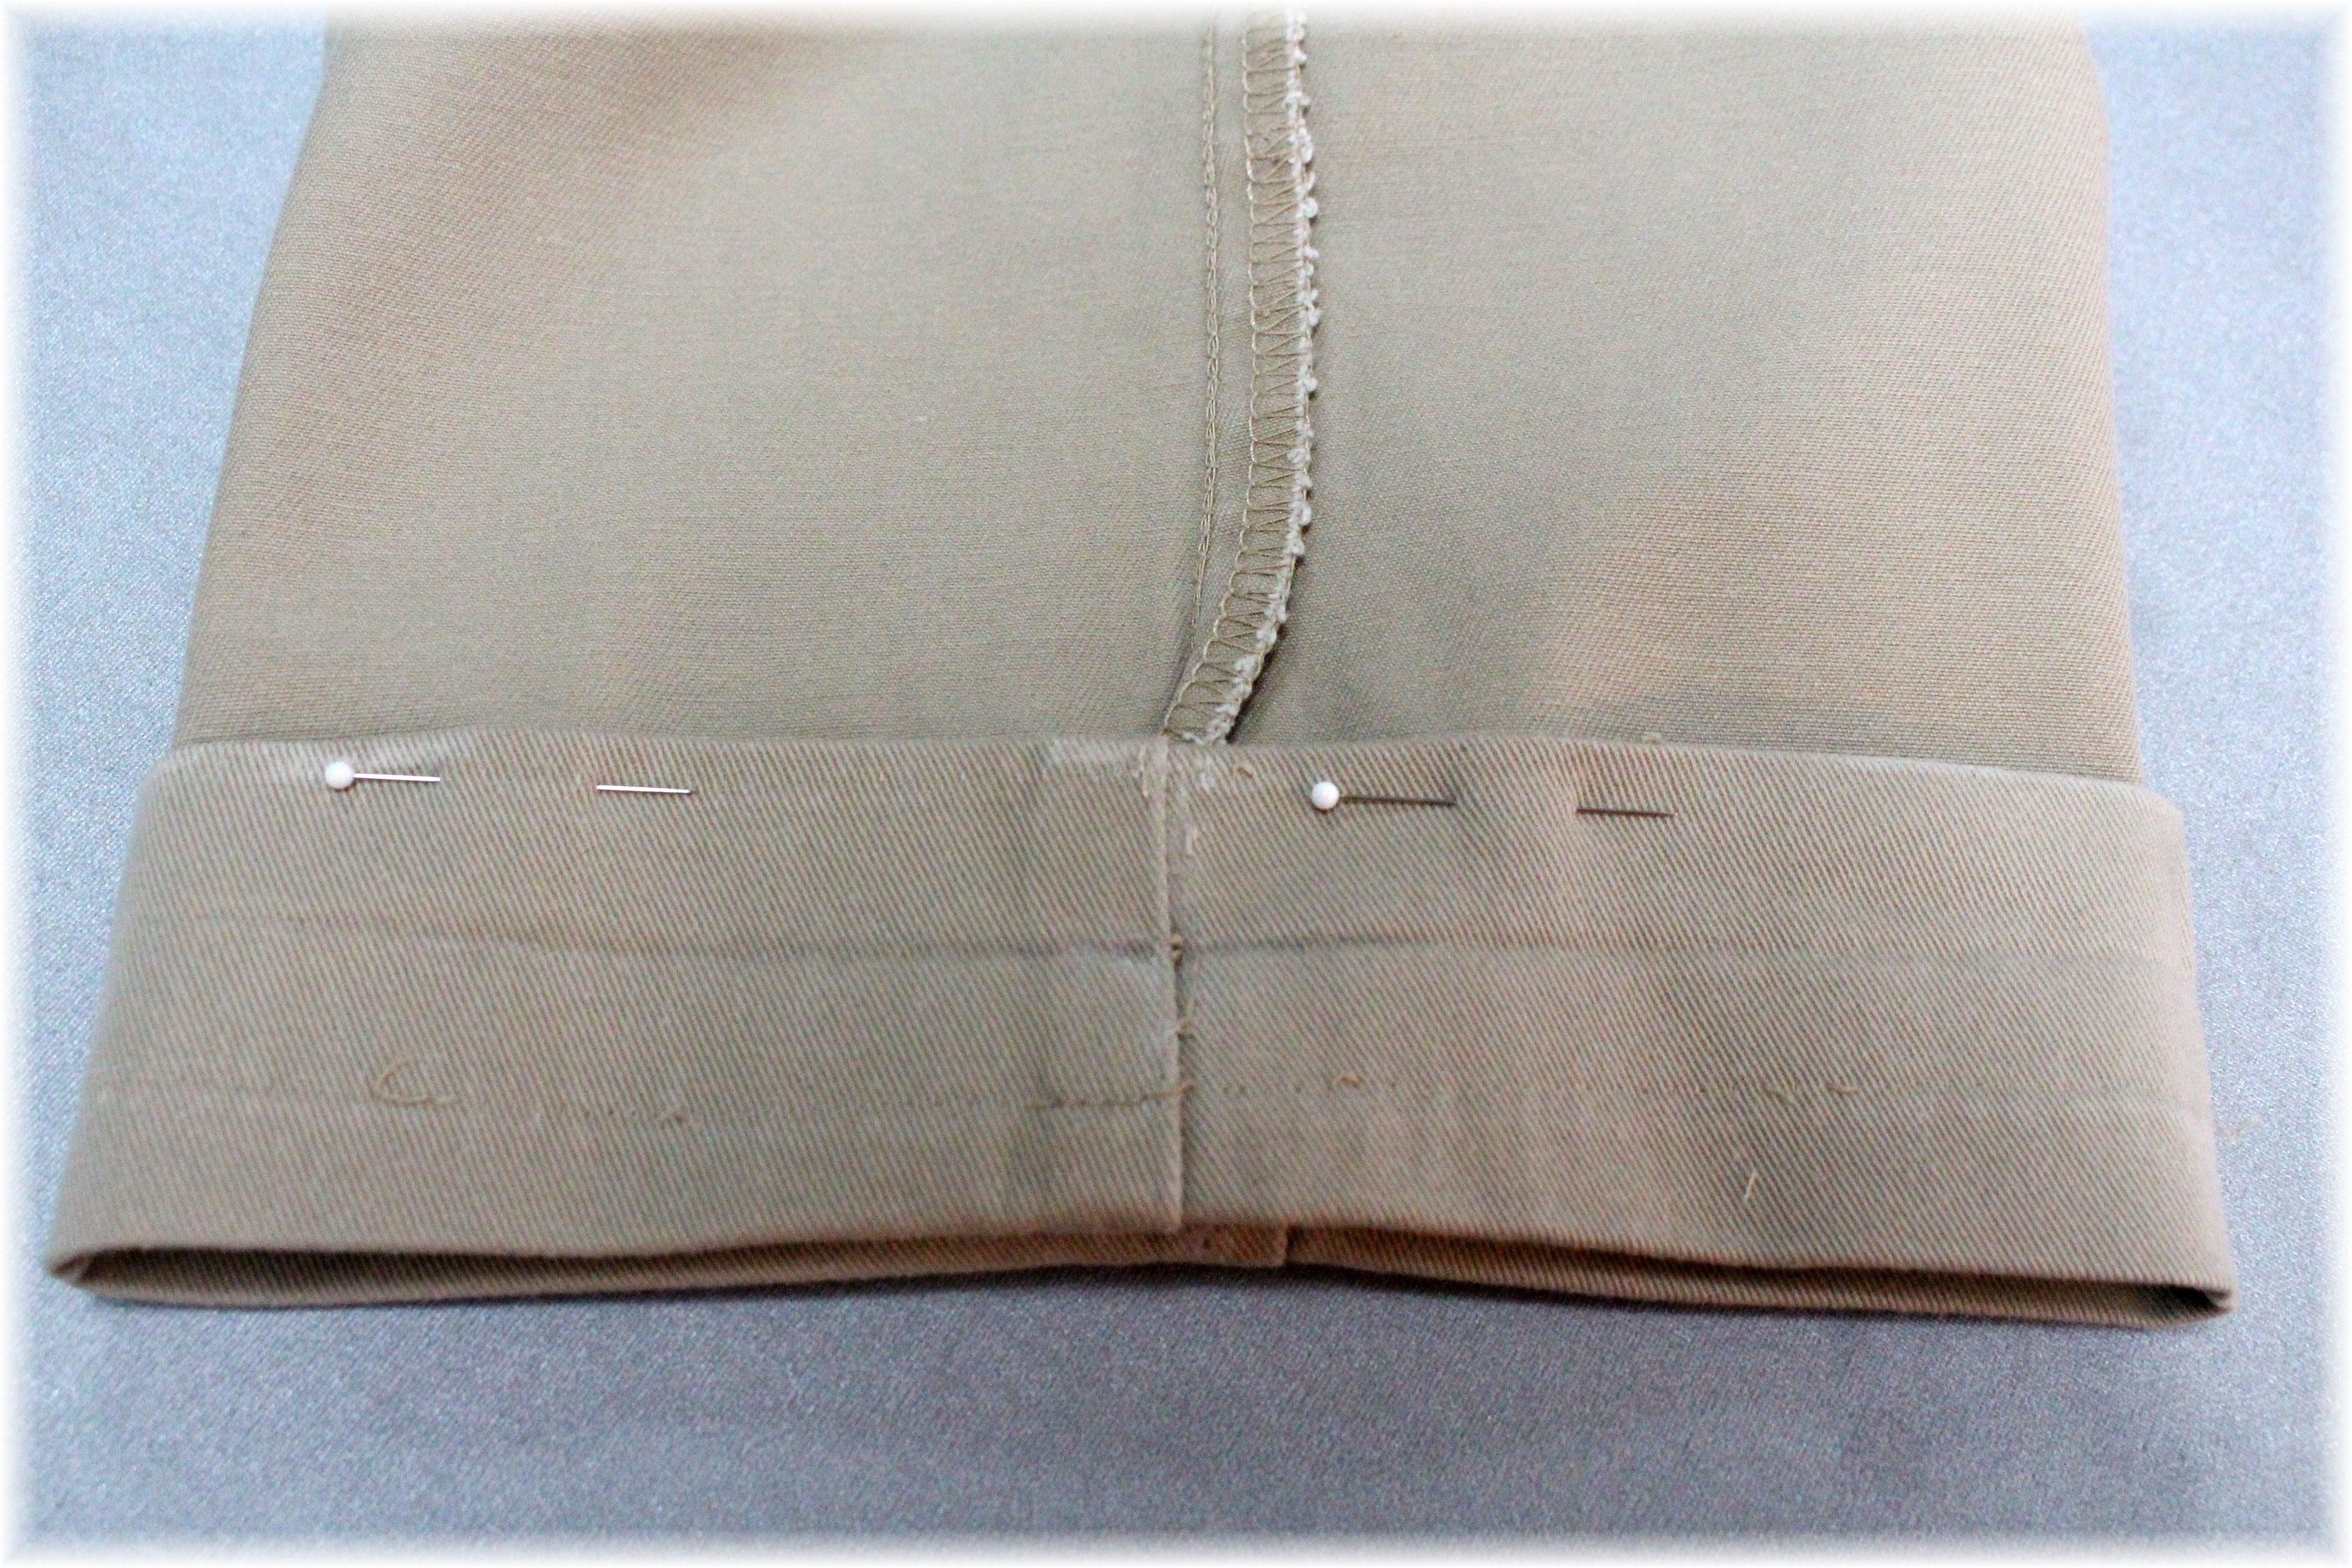 Sewing Tutorial: Hemming Pants with Cuffs ~ Angela Wolf's Sewing Blog